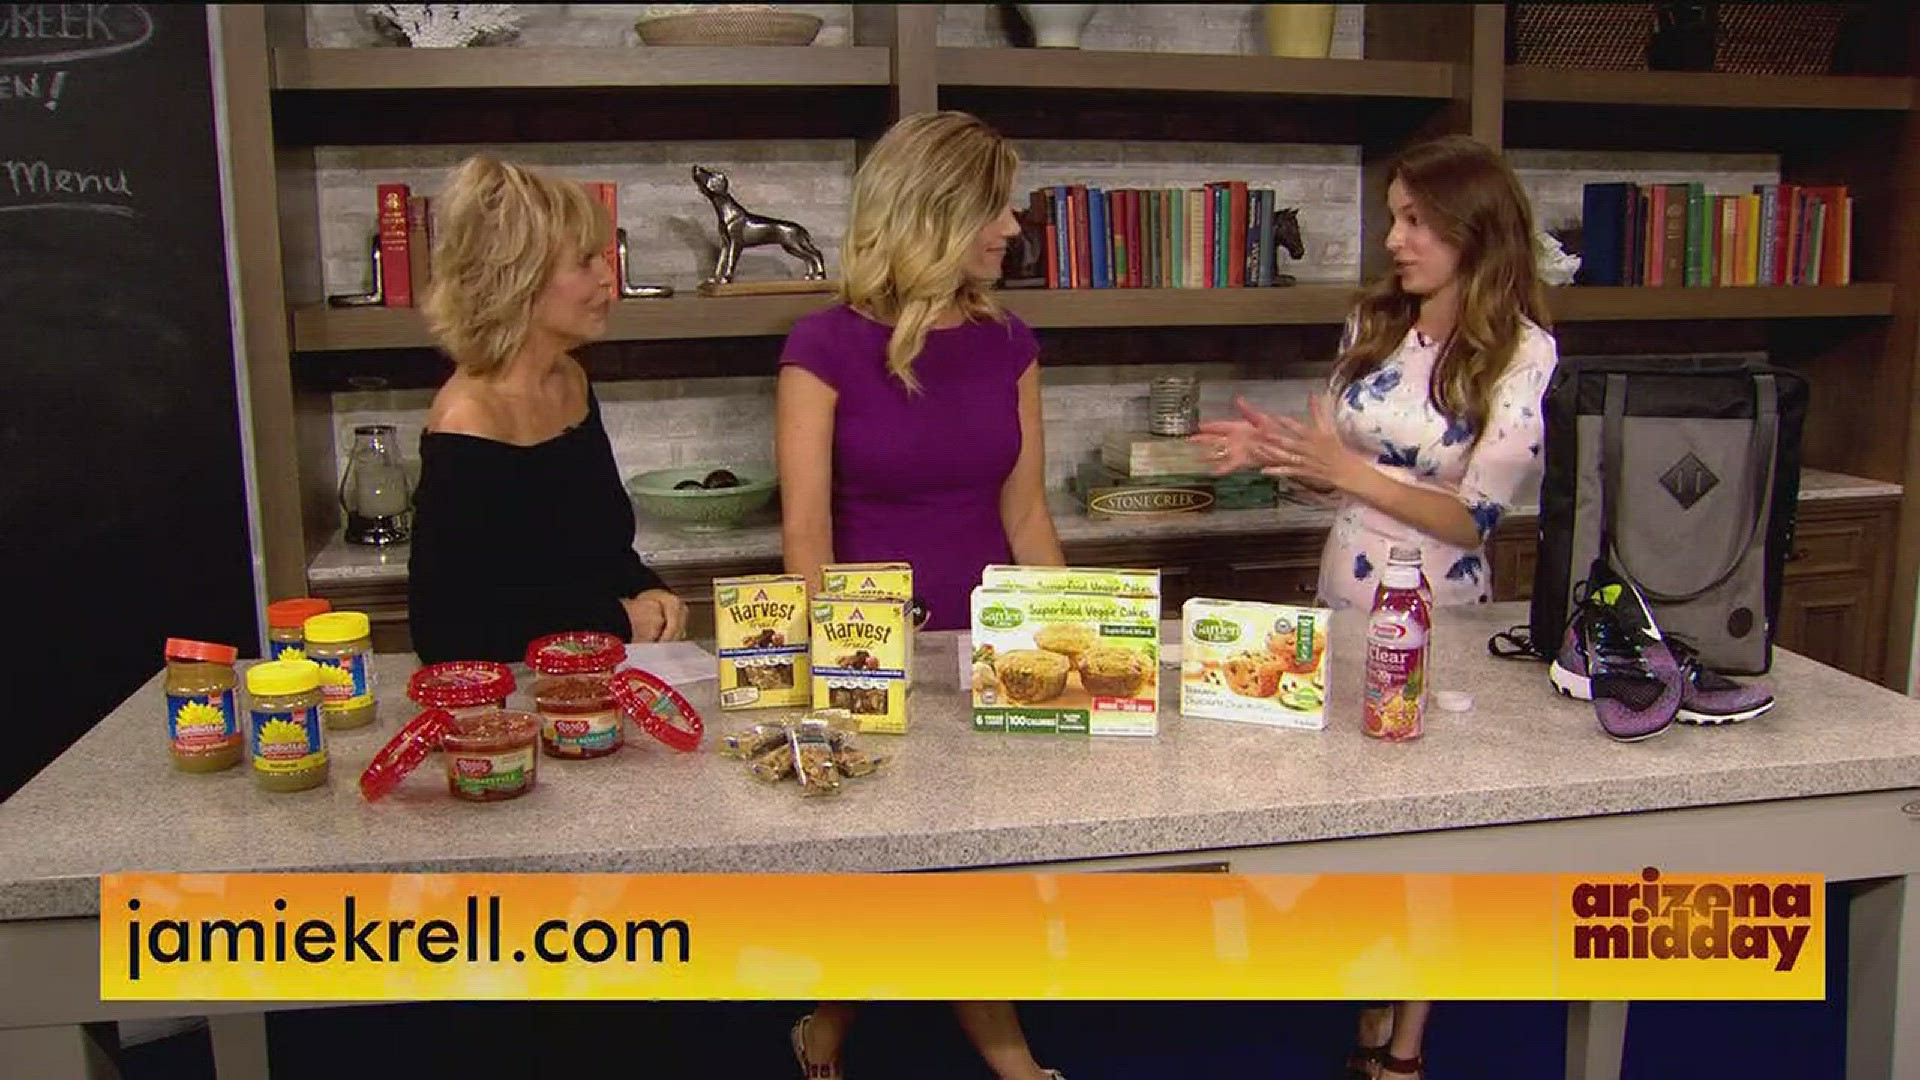 The summer season is coming to an end but that doesn't mean your healthy habits should too. Lifestyle expert Jamie Krell is here with ways to stick with it!